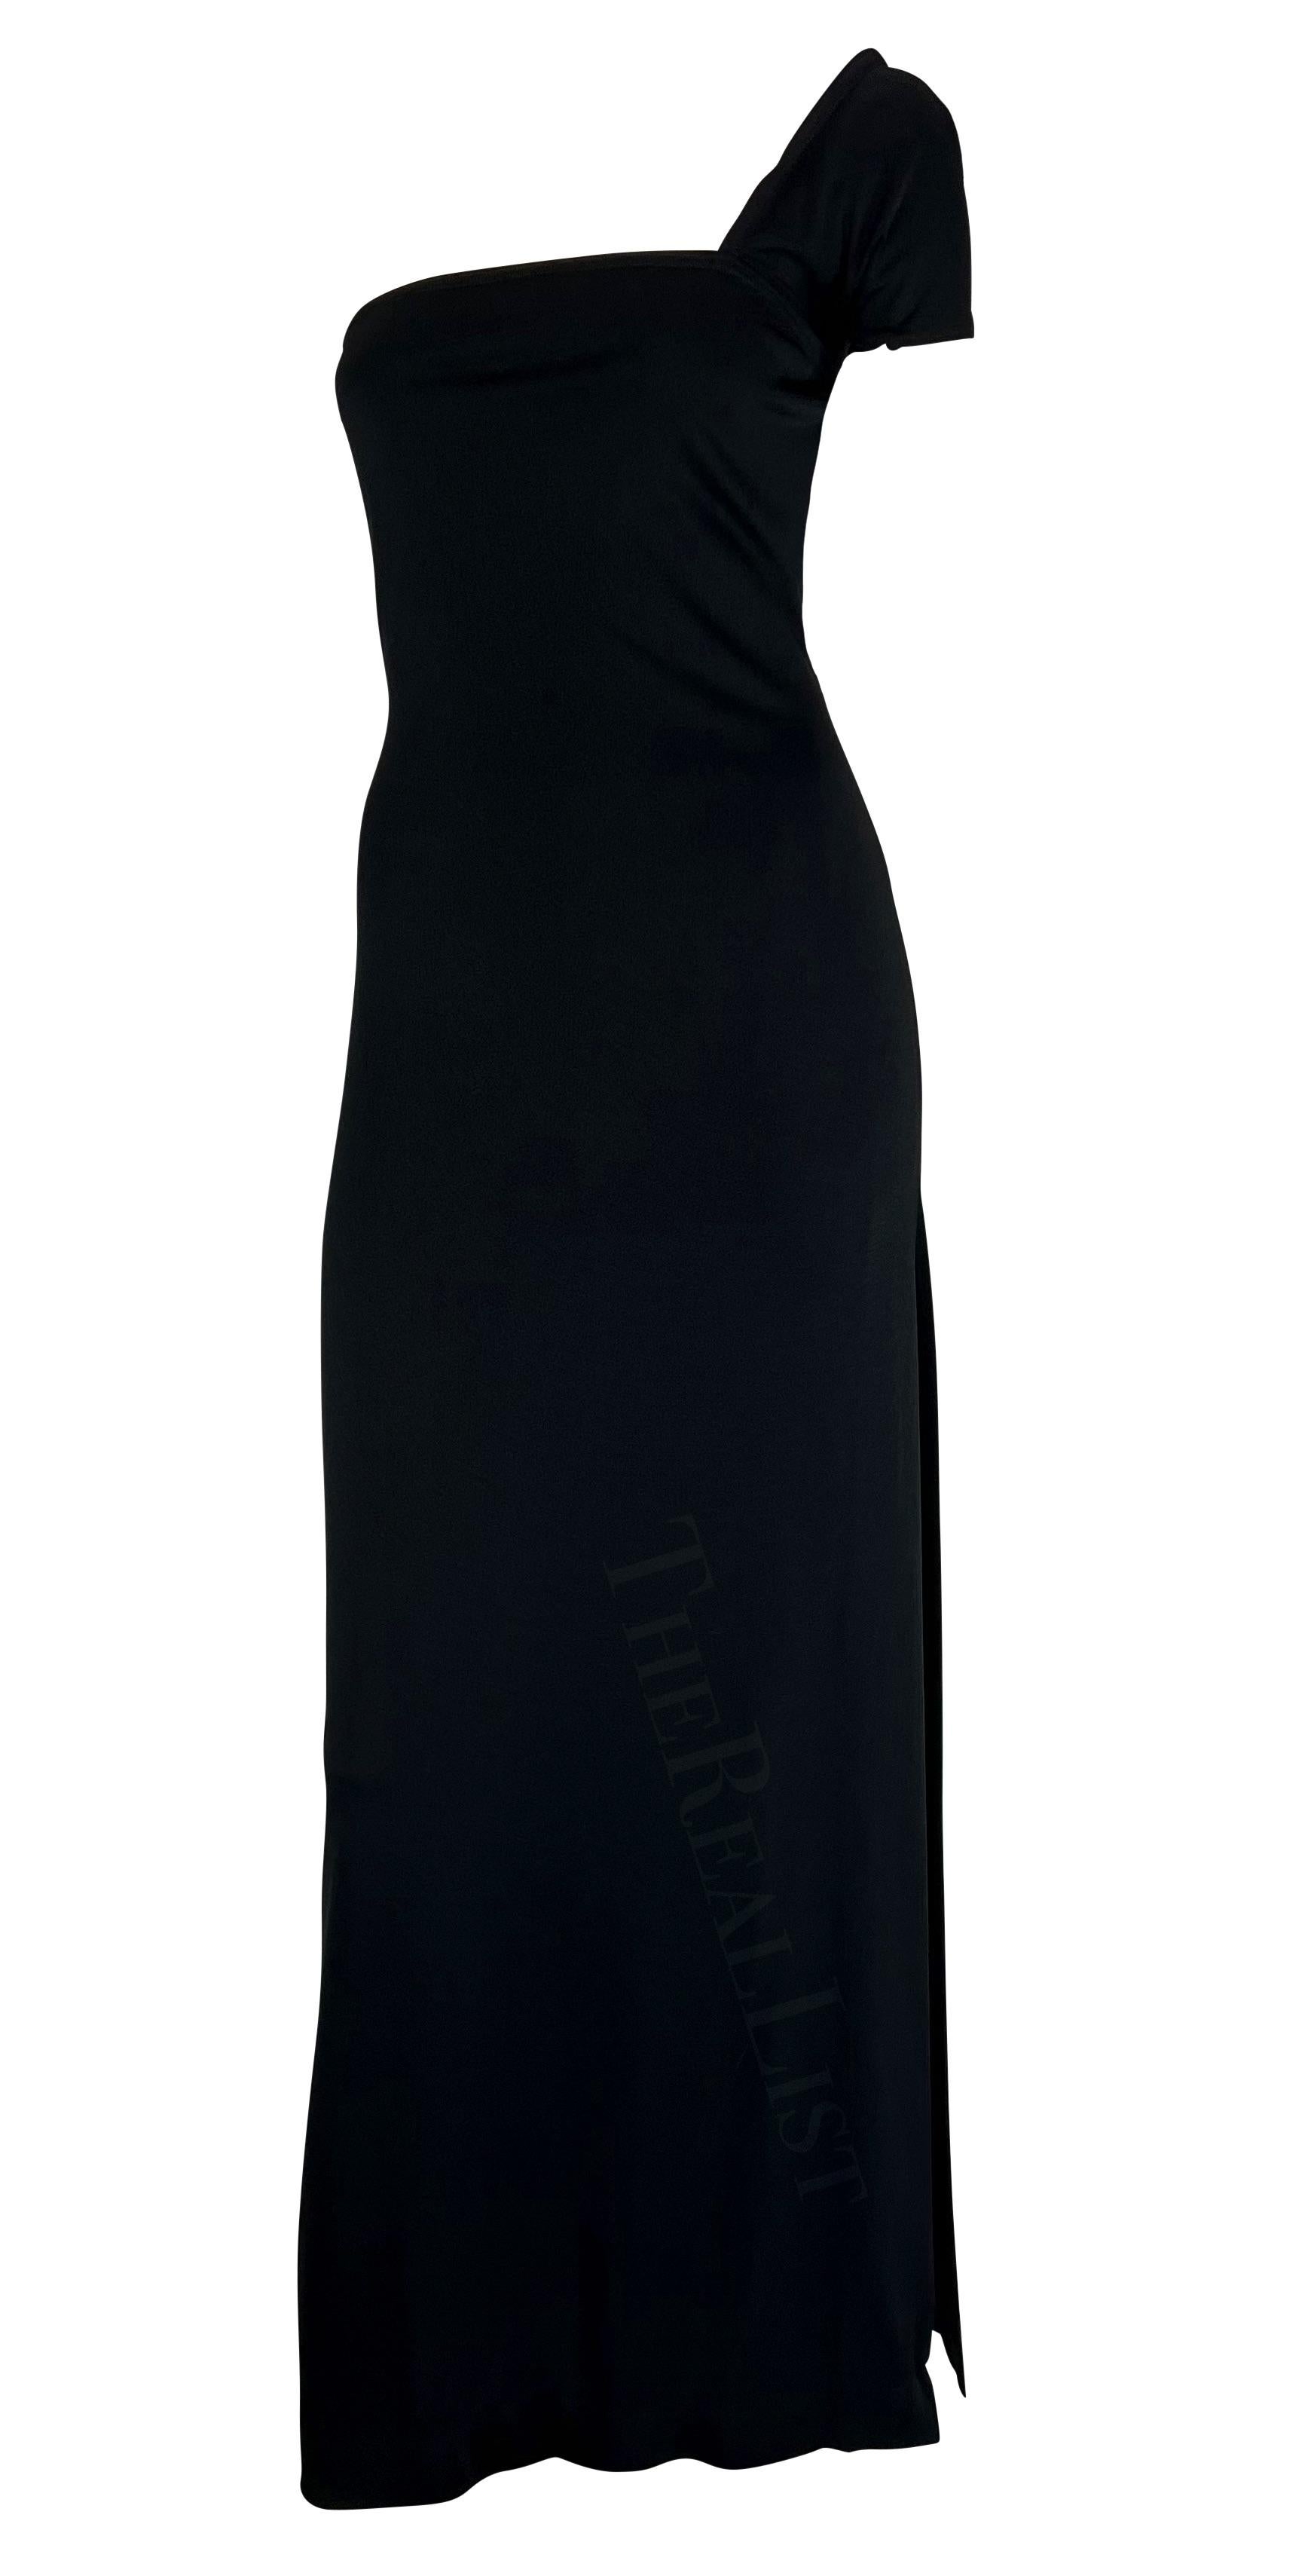 Presenting an incredible black Rudi Gernreich for Bob Cunningham evening gown. From the 1970s, this chic column-style dress features a single off-the-shoulder strap, an angular neckline, and a high slit on one side. A timeless and exceptional dress,